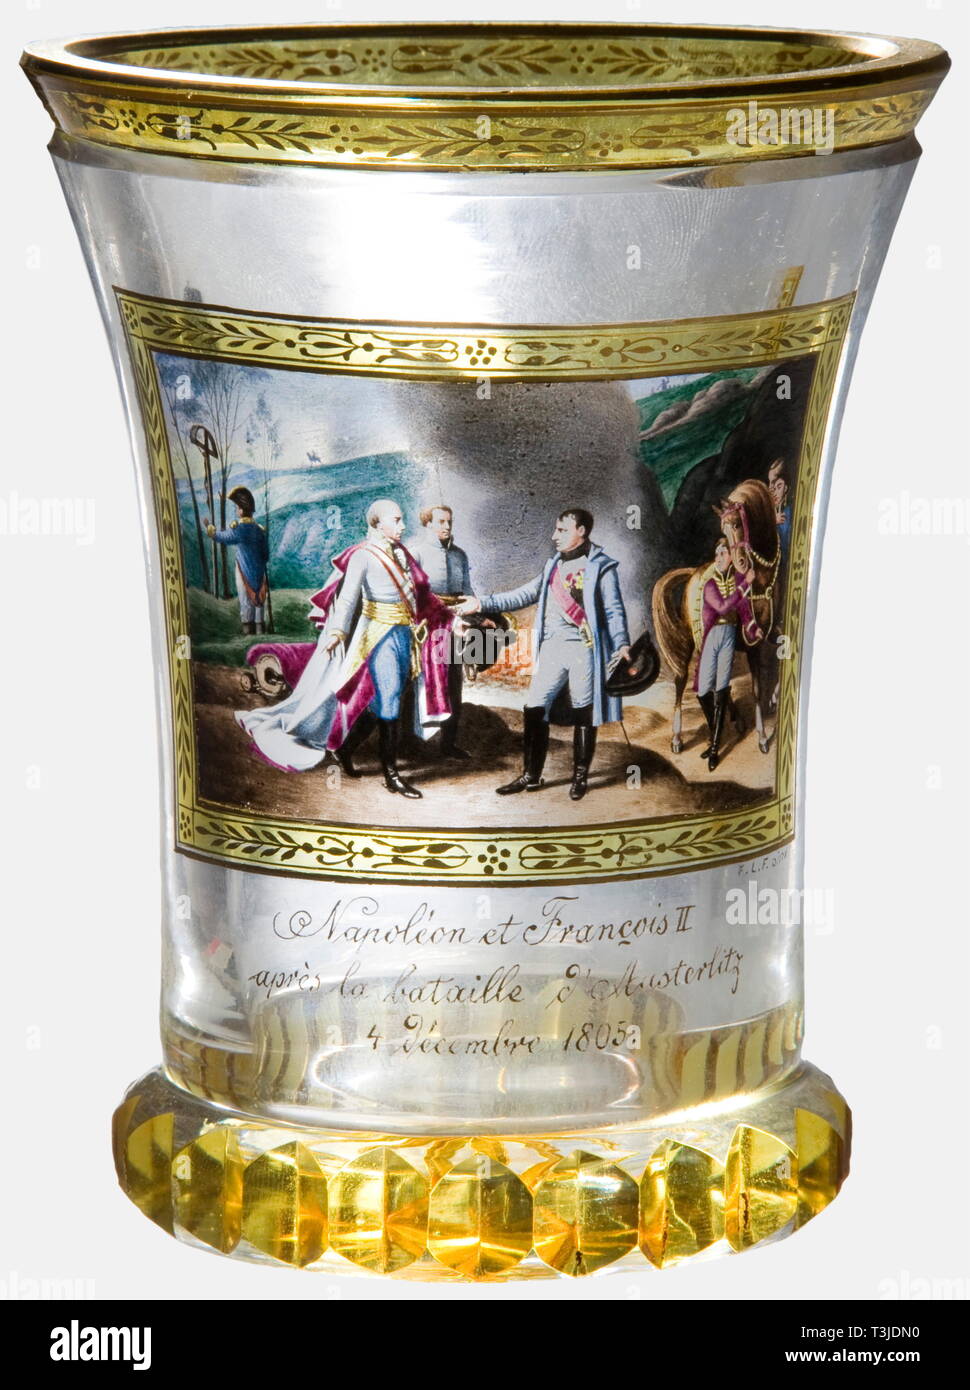 Napoleon and Francois II after the Battle of Austerlitz, a Viennese glass beaker, Fürchtegott Leberecht Fischer, circa 1900 Crystal glass flashed with yellow coloured glass in places and golden decoration. The front bears a transparent enamel painting showing the meeting between Napoleon and the Austrian Emperor Franz II on 4 December 1805 at Nasiedlowitz, signed, "F.L.F. pinx" at the lower left above the title and date, "4 décembre 1805." A circular lens ground on the back, and a protuding serrated 'cogwheel' base ring as well as a star ground i, Additional-Rights-Clearance-Info-Not-Available Stock Photo